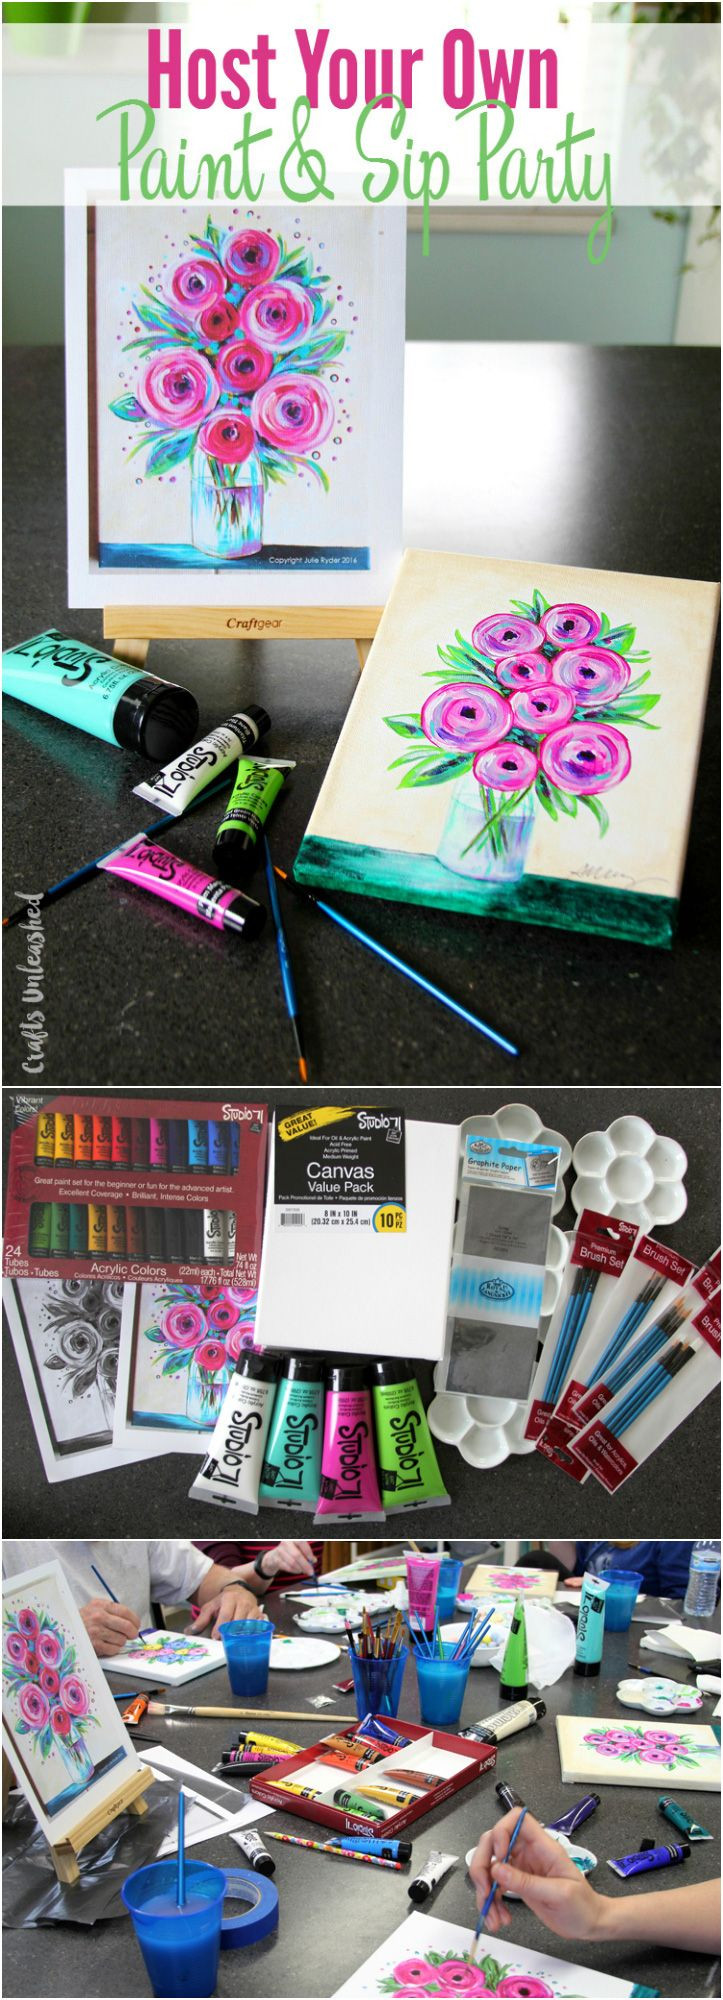 DIY Kids Painting Party
 DIY Painting Party Host Your Own Paint & Sip Consumer